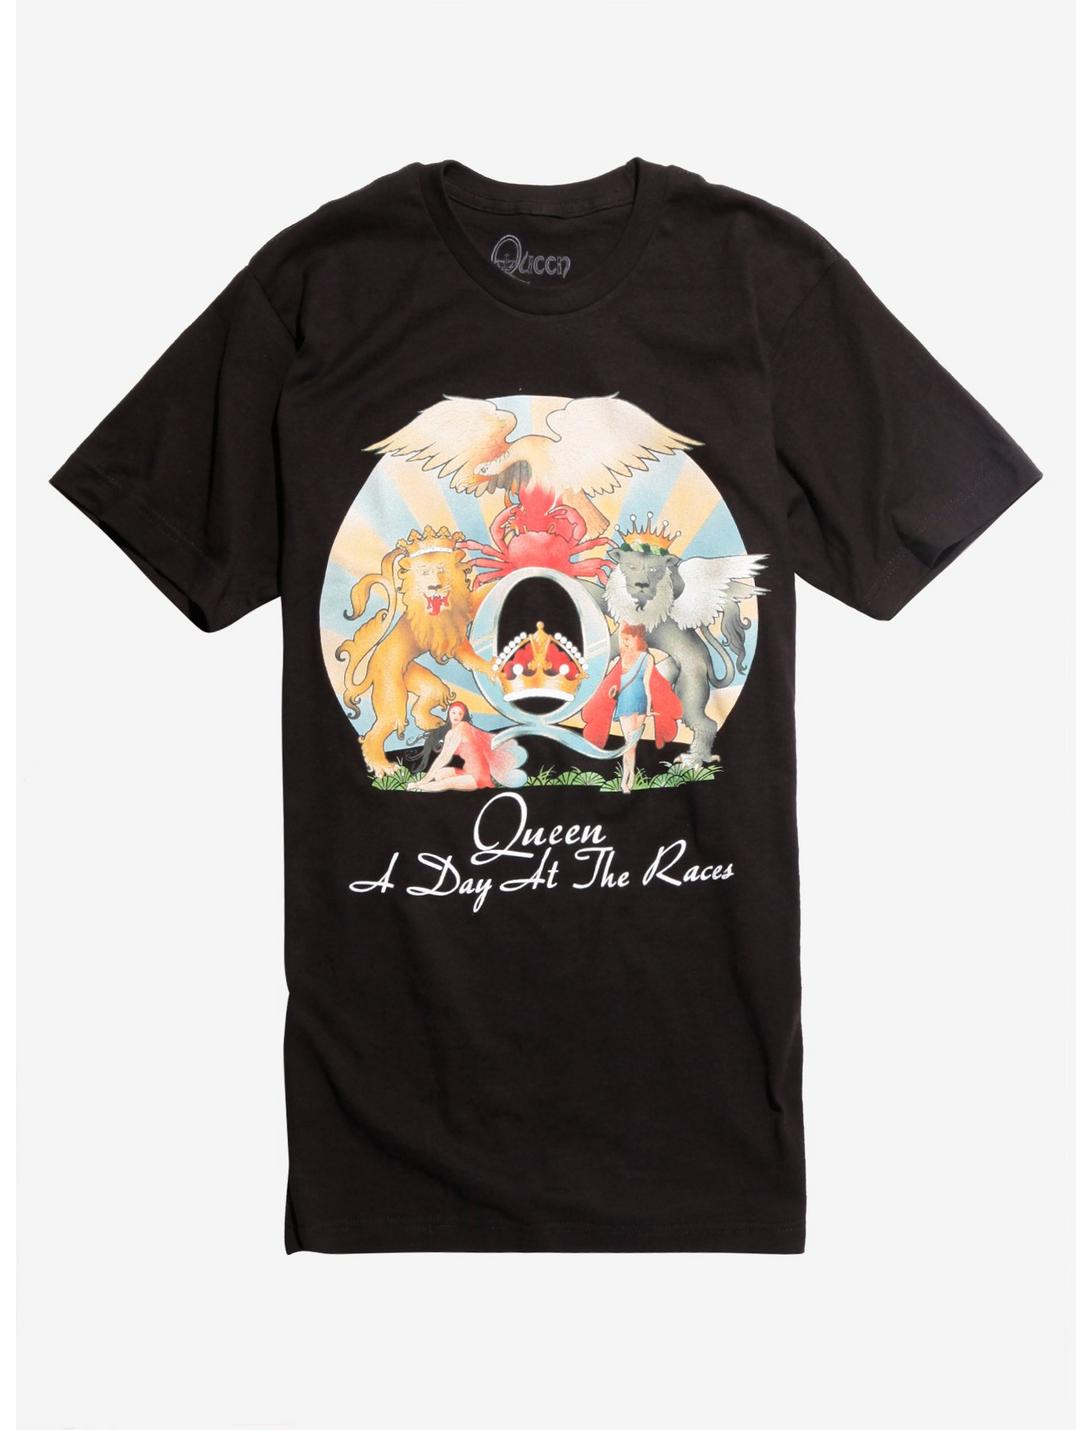 Queen A Day At The Races T-Shirt, BLACK, hi-res